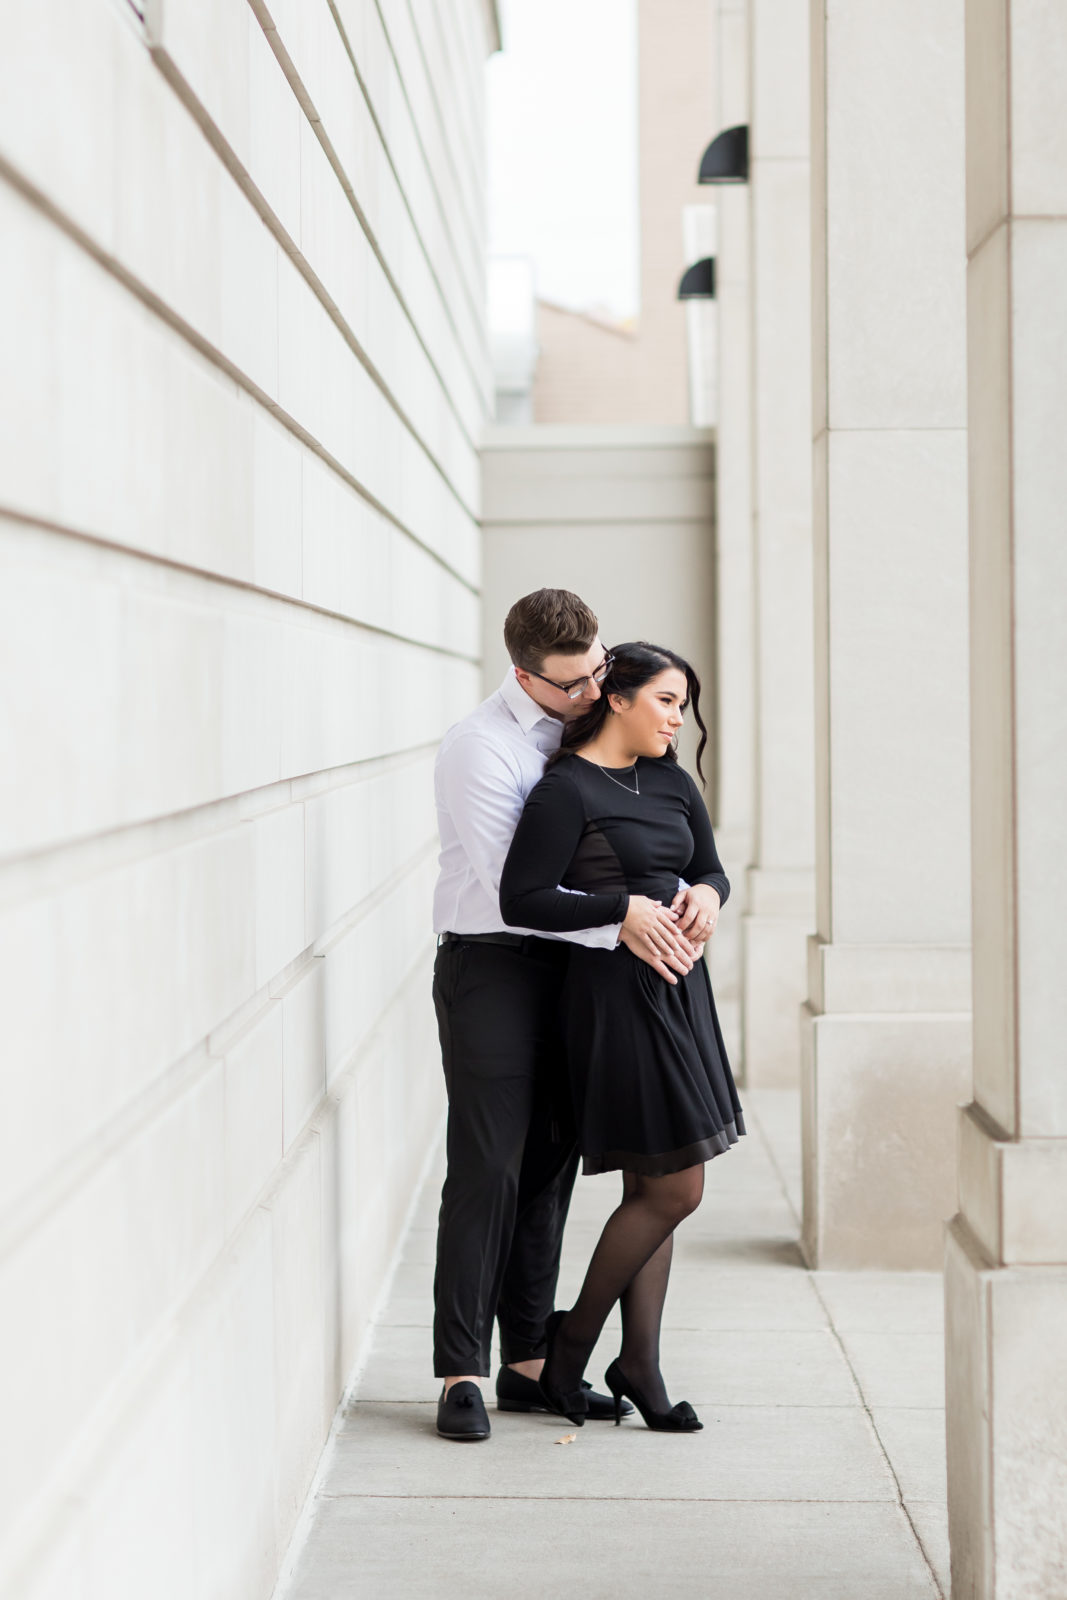 Classy Downtown Fargo Engagement Photo Session